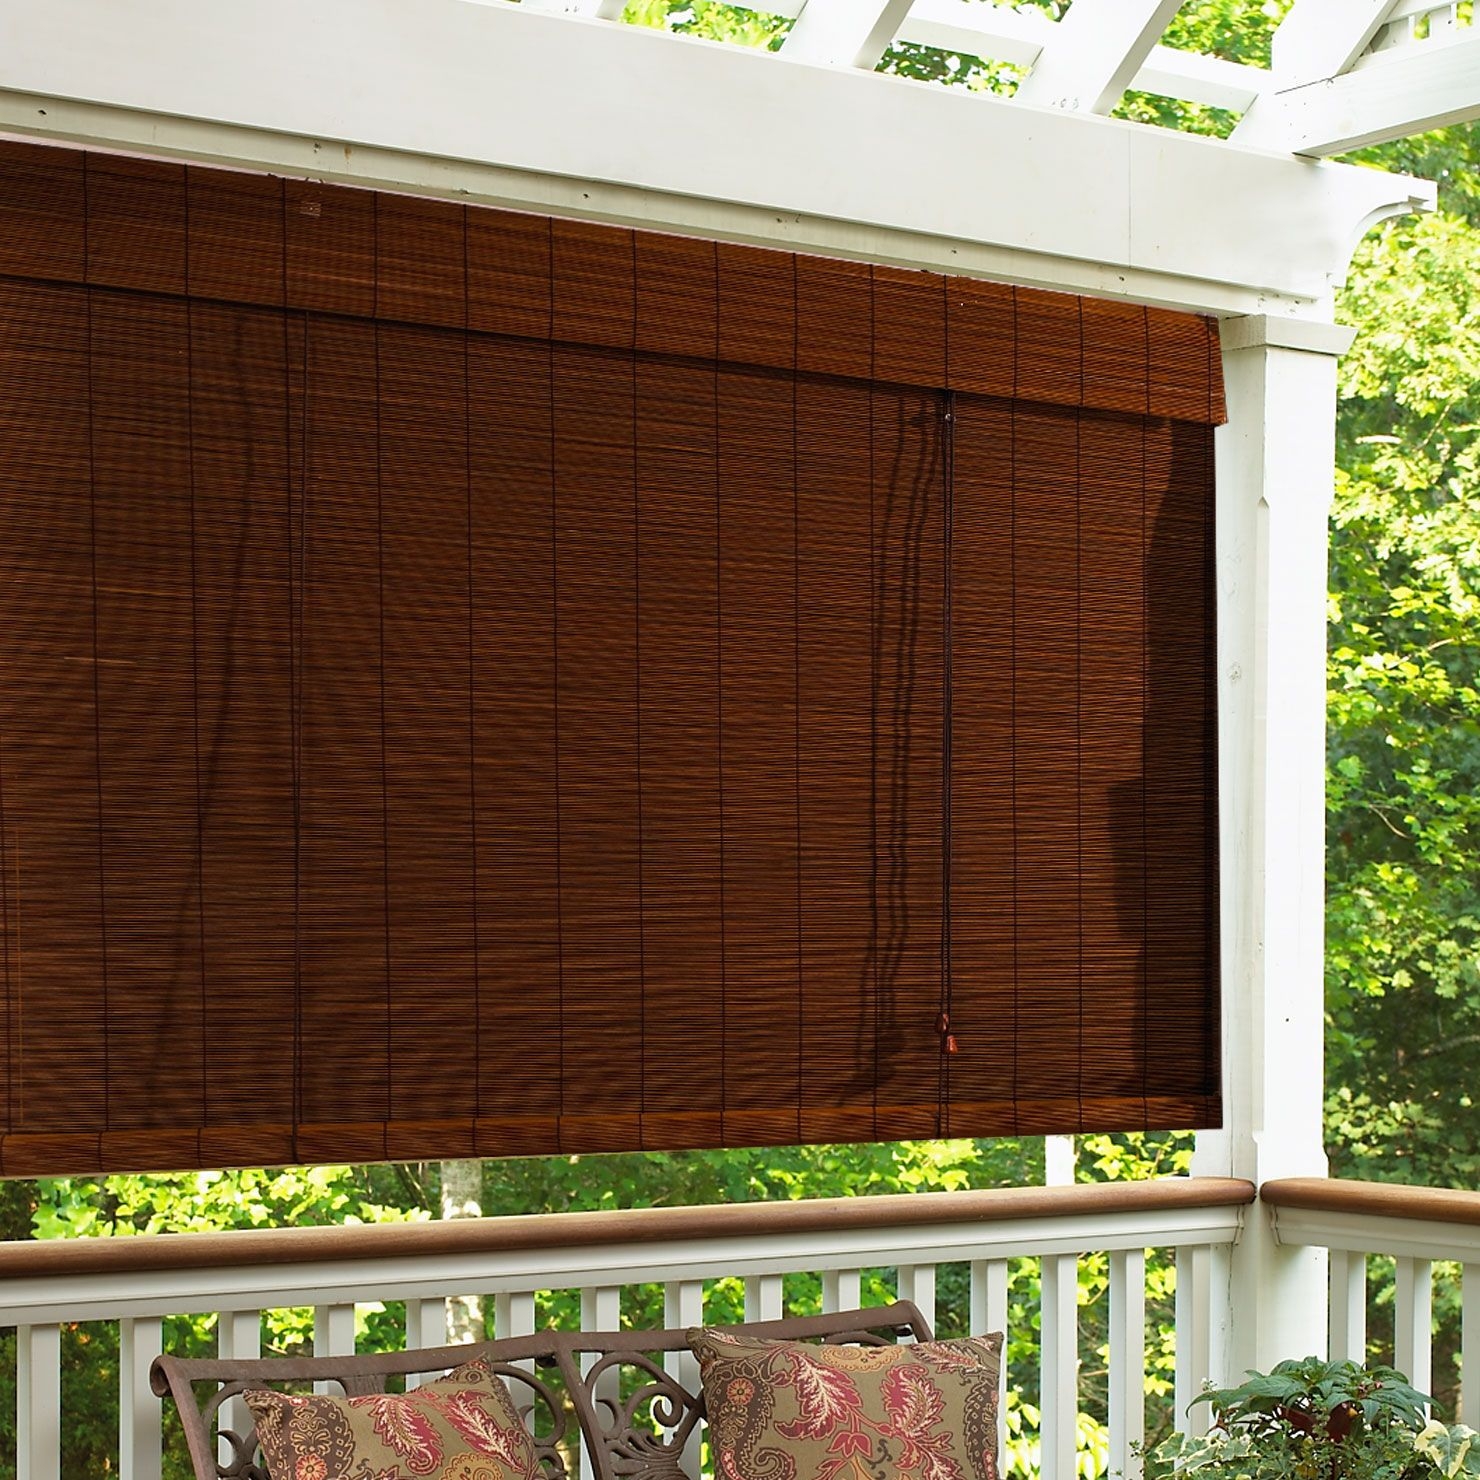 Outdoor Roll Up Bamboo Blinds Visualhunt, Big Lots Outdoor Bamboo Shades